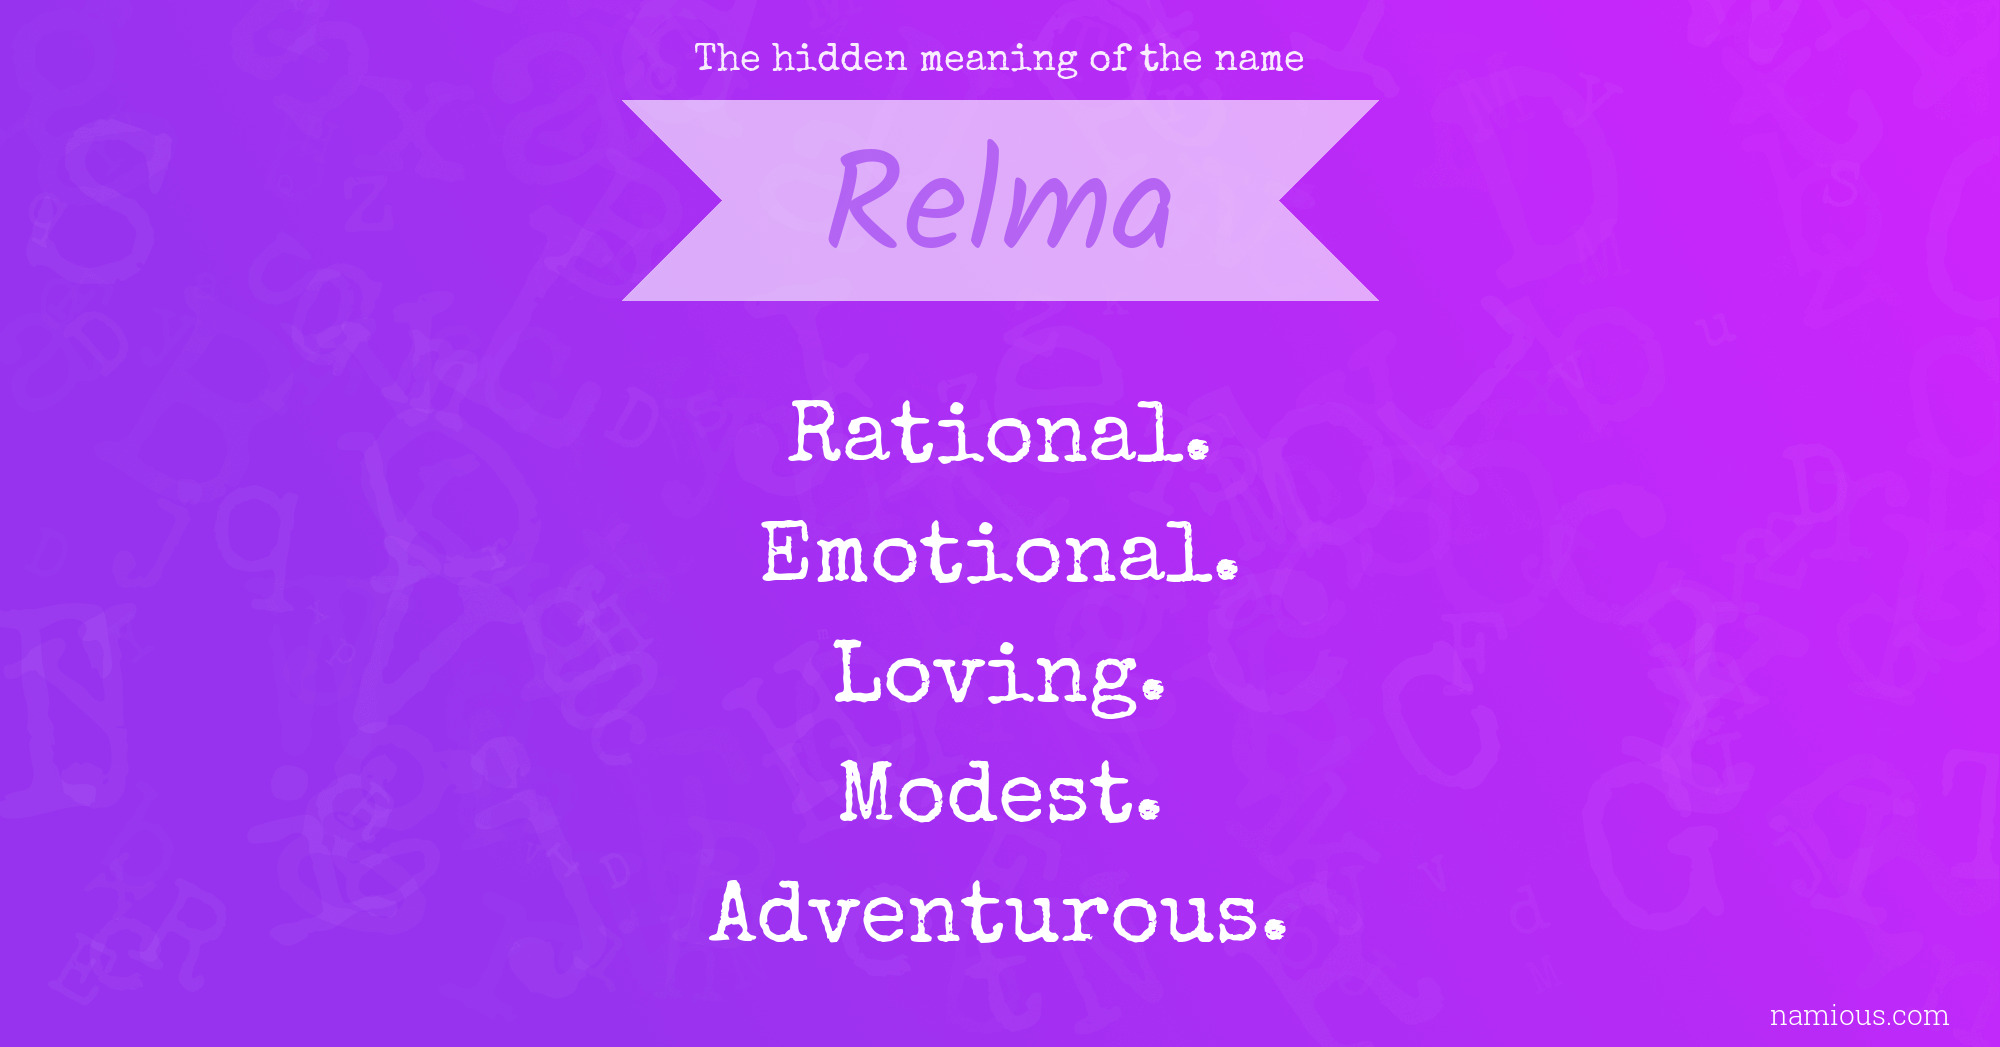 The hidden meaning of the name Relma